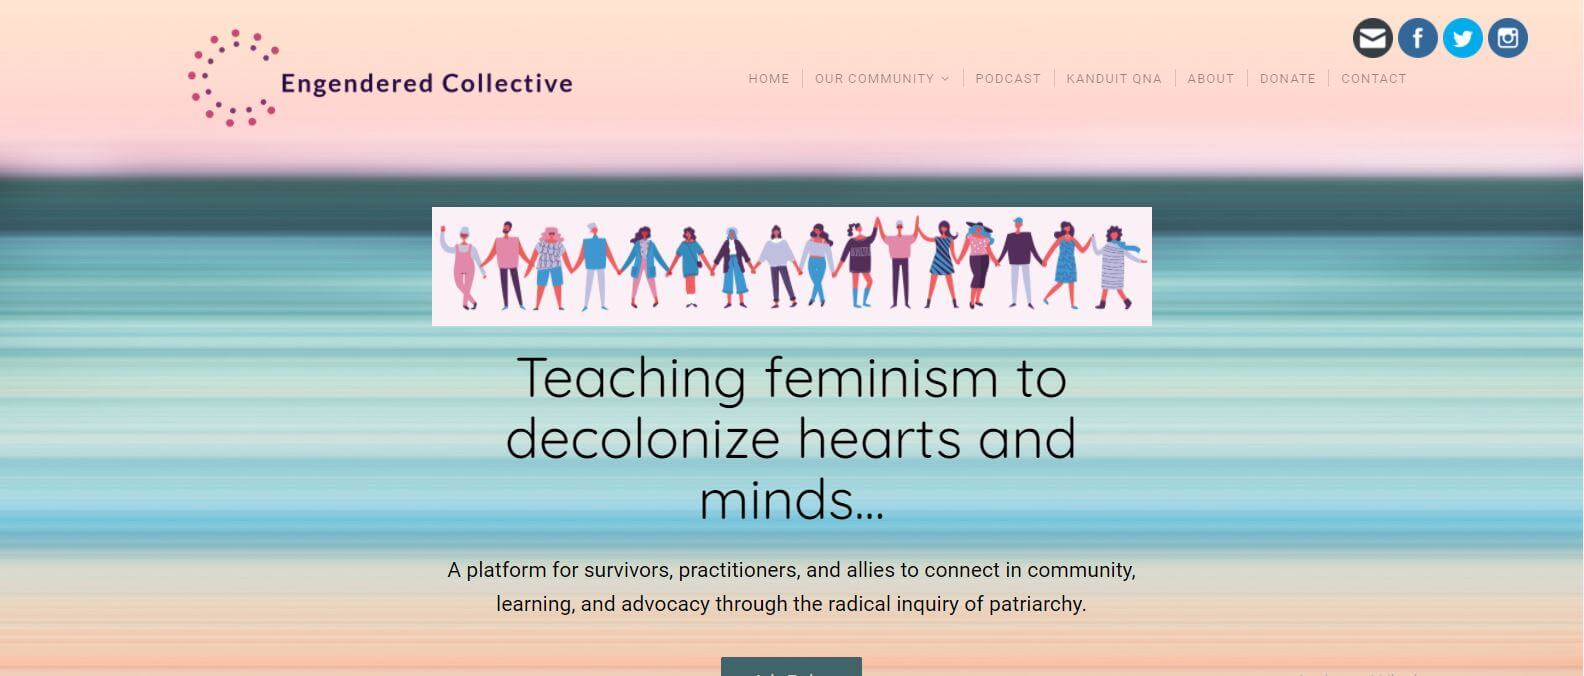 Engendered Collective